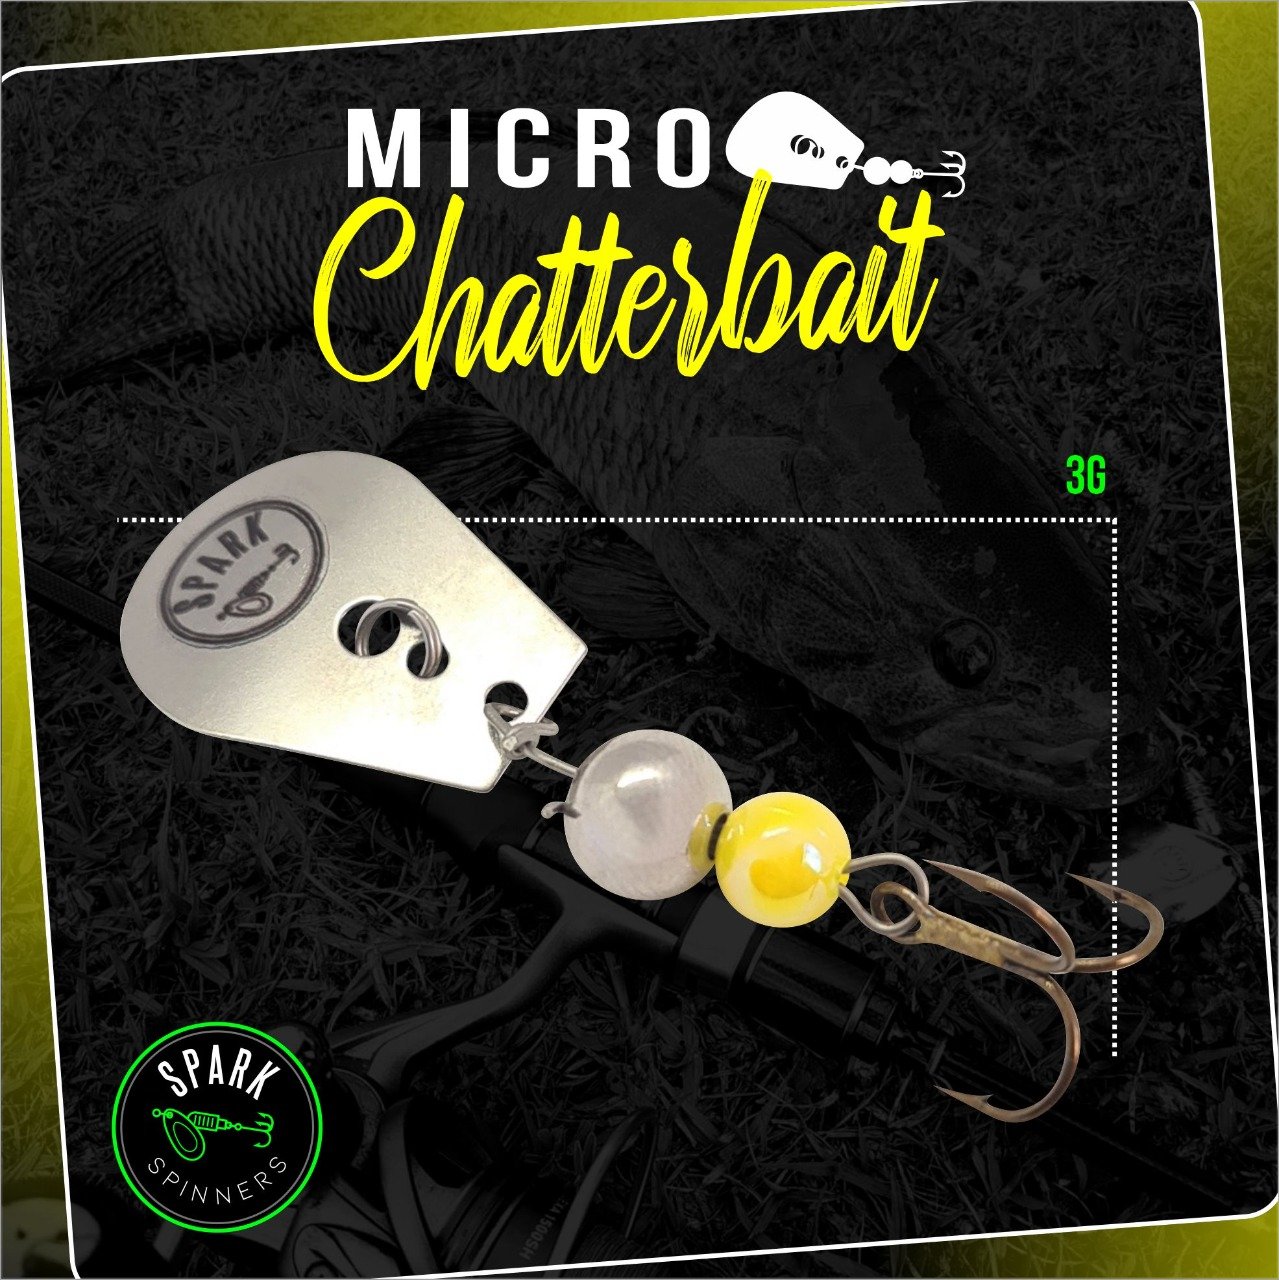 Micro Chatter Bait Spark Spinners 5cm 3g